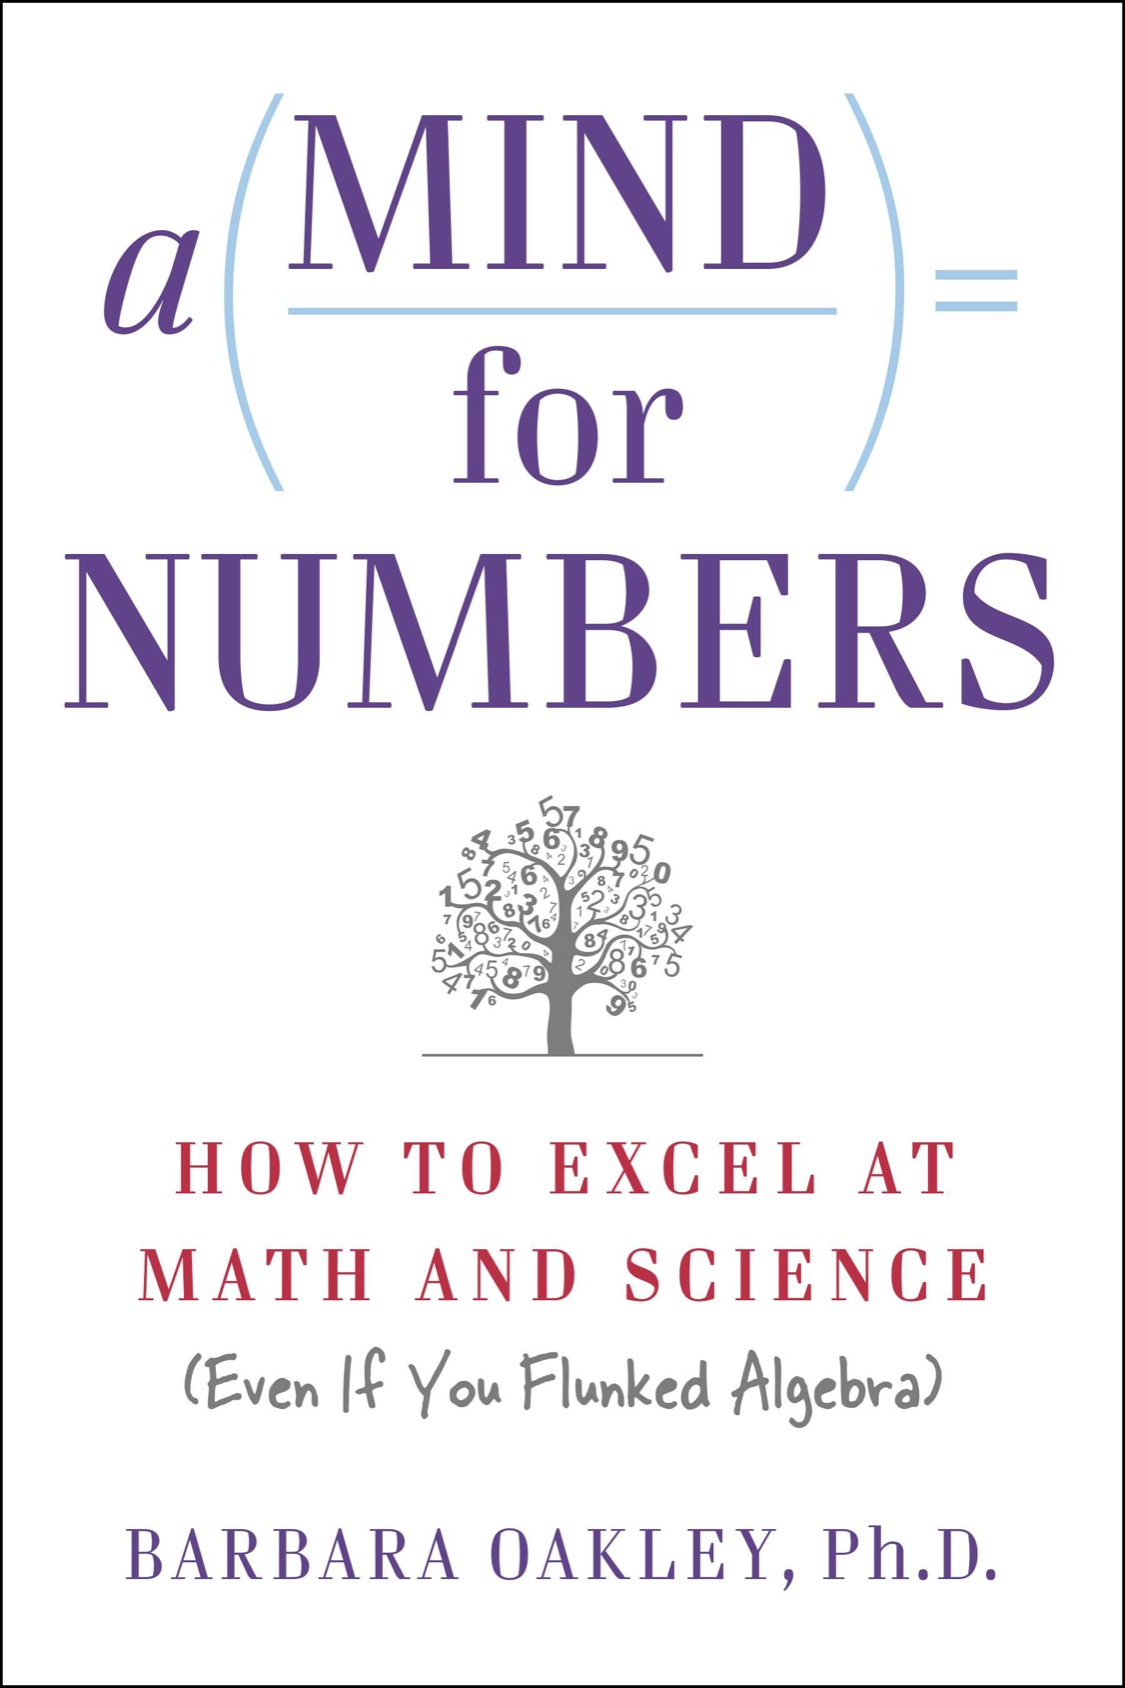 A Mind for Numbers: How to Excel at Math and Science (Even if You Flunked Algebra)